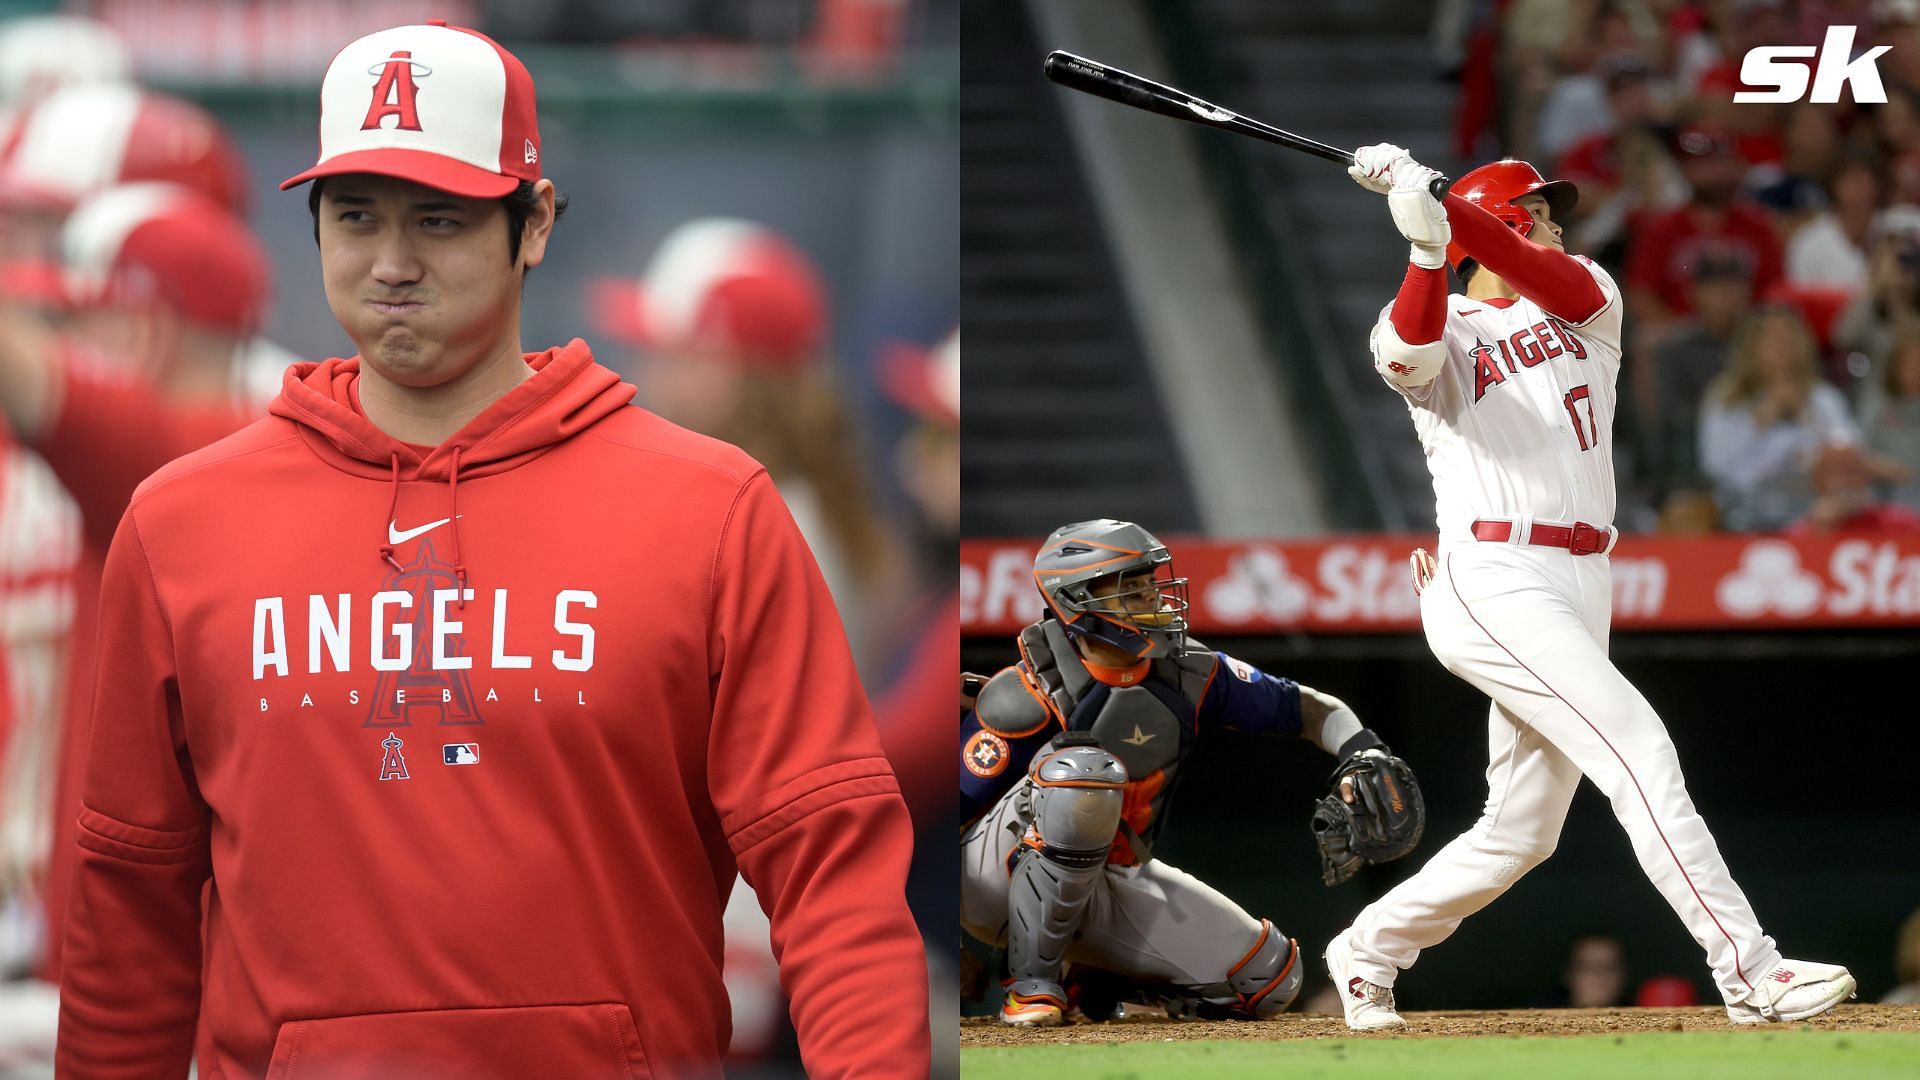 Angels fans blast Arte Moreno as Shohei Ohtani signs for freeway rivals in mega deal. 